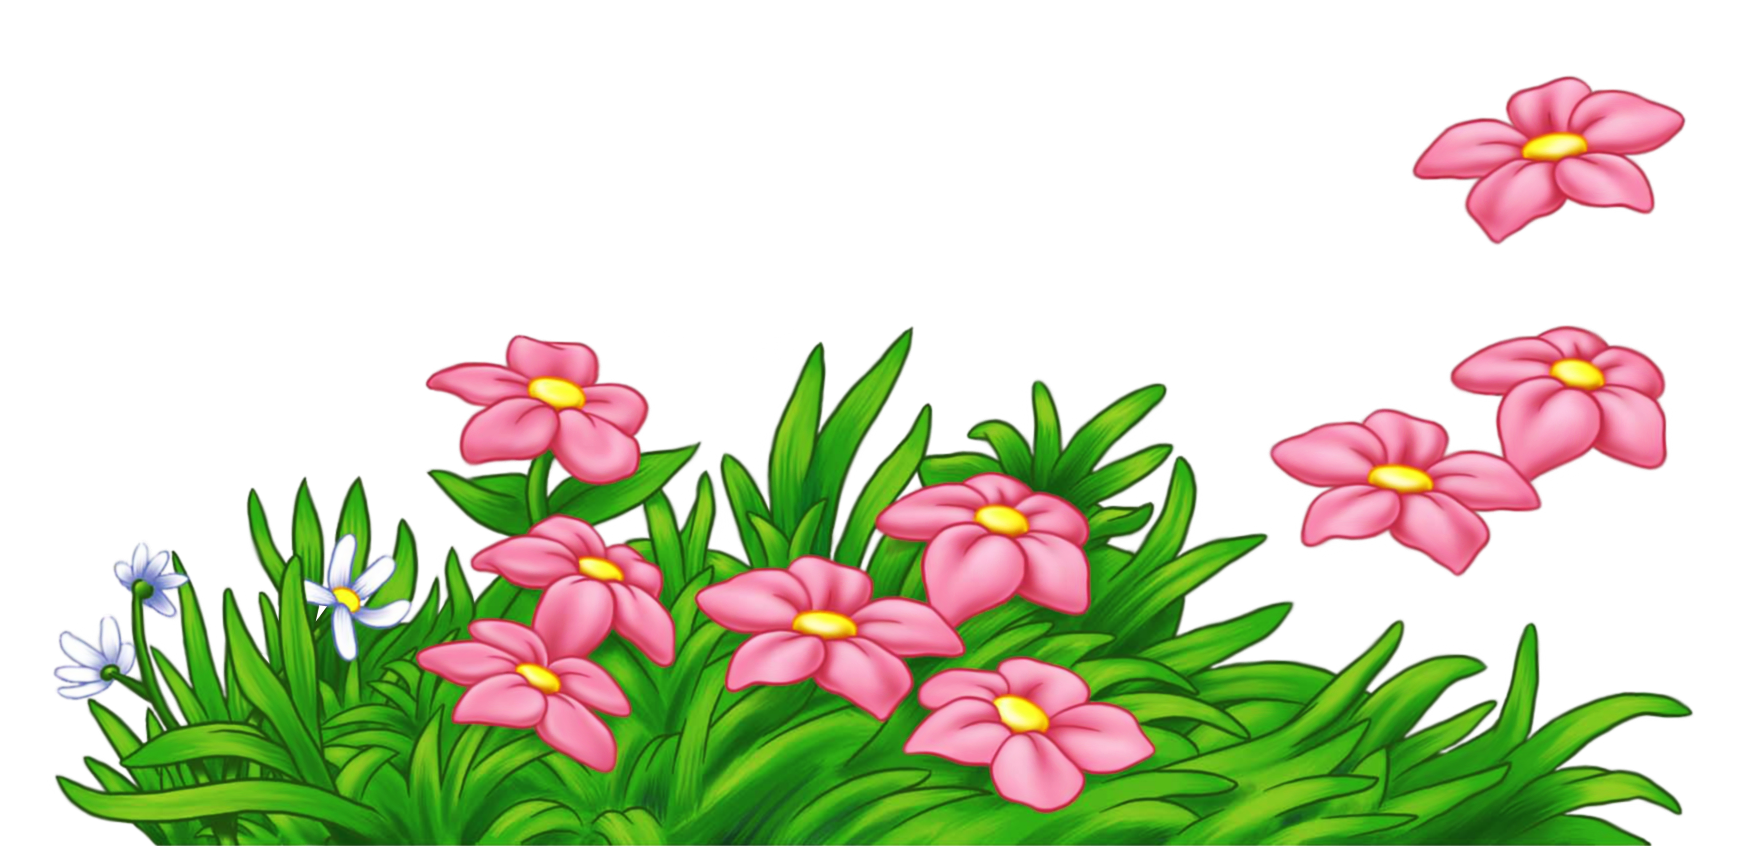 Grass with pink flowers. Woodland clipart floral